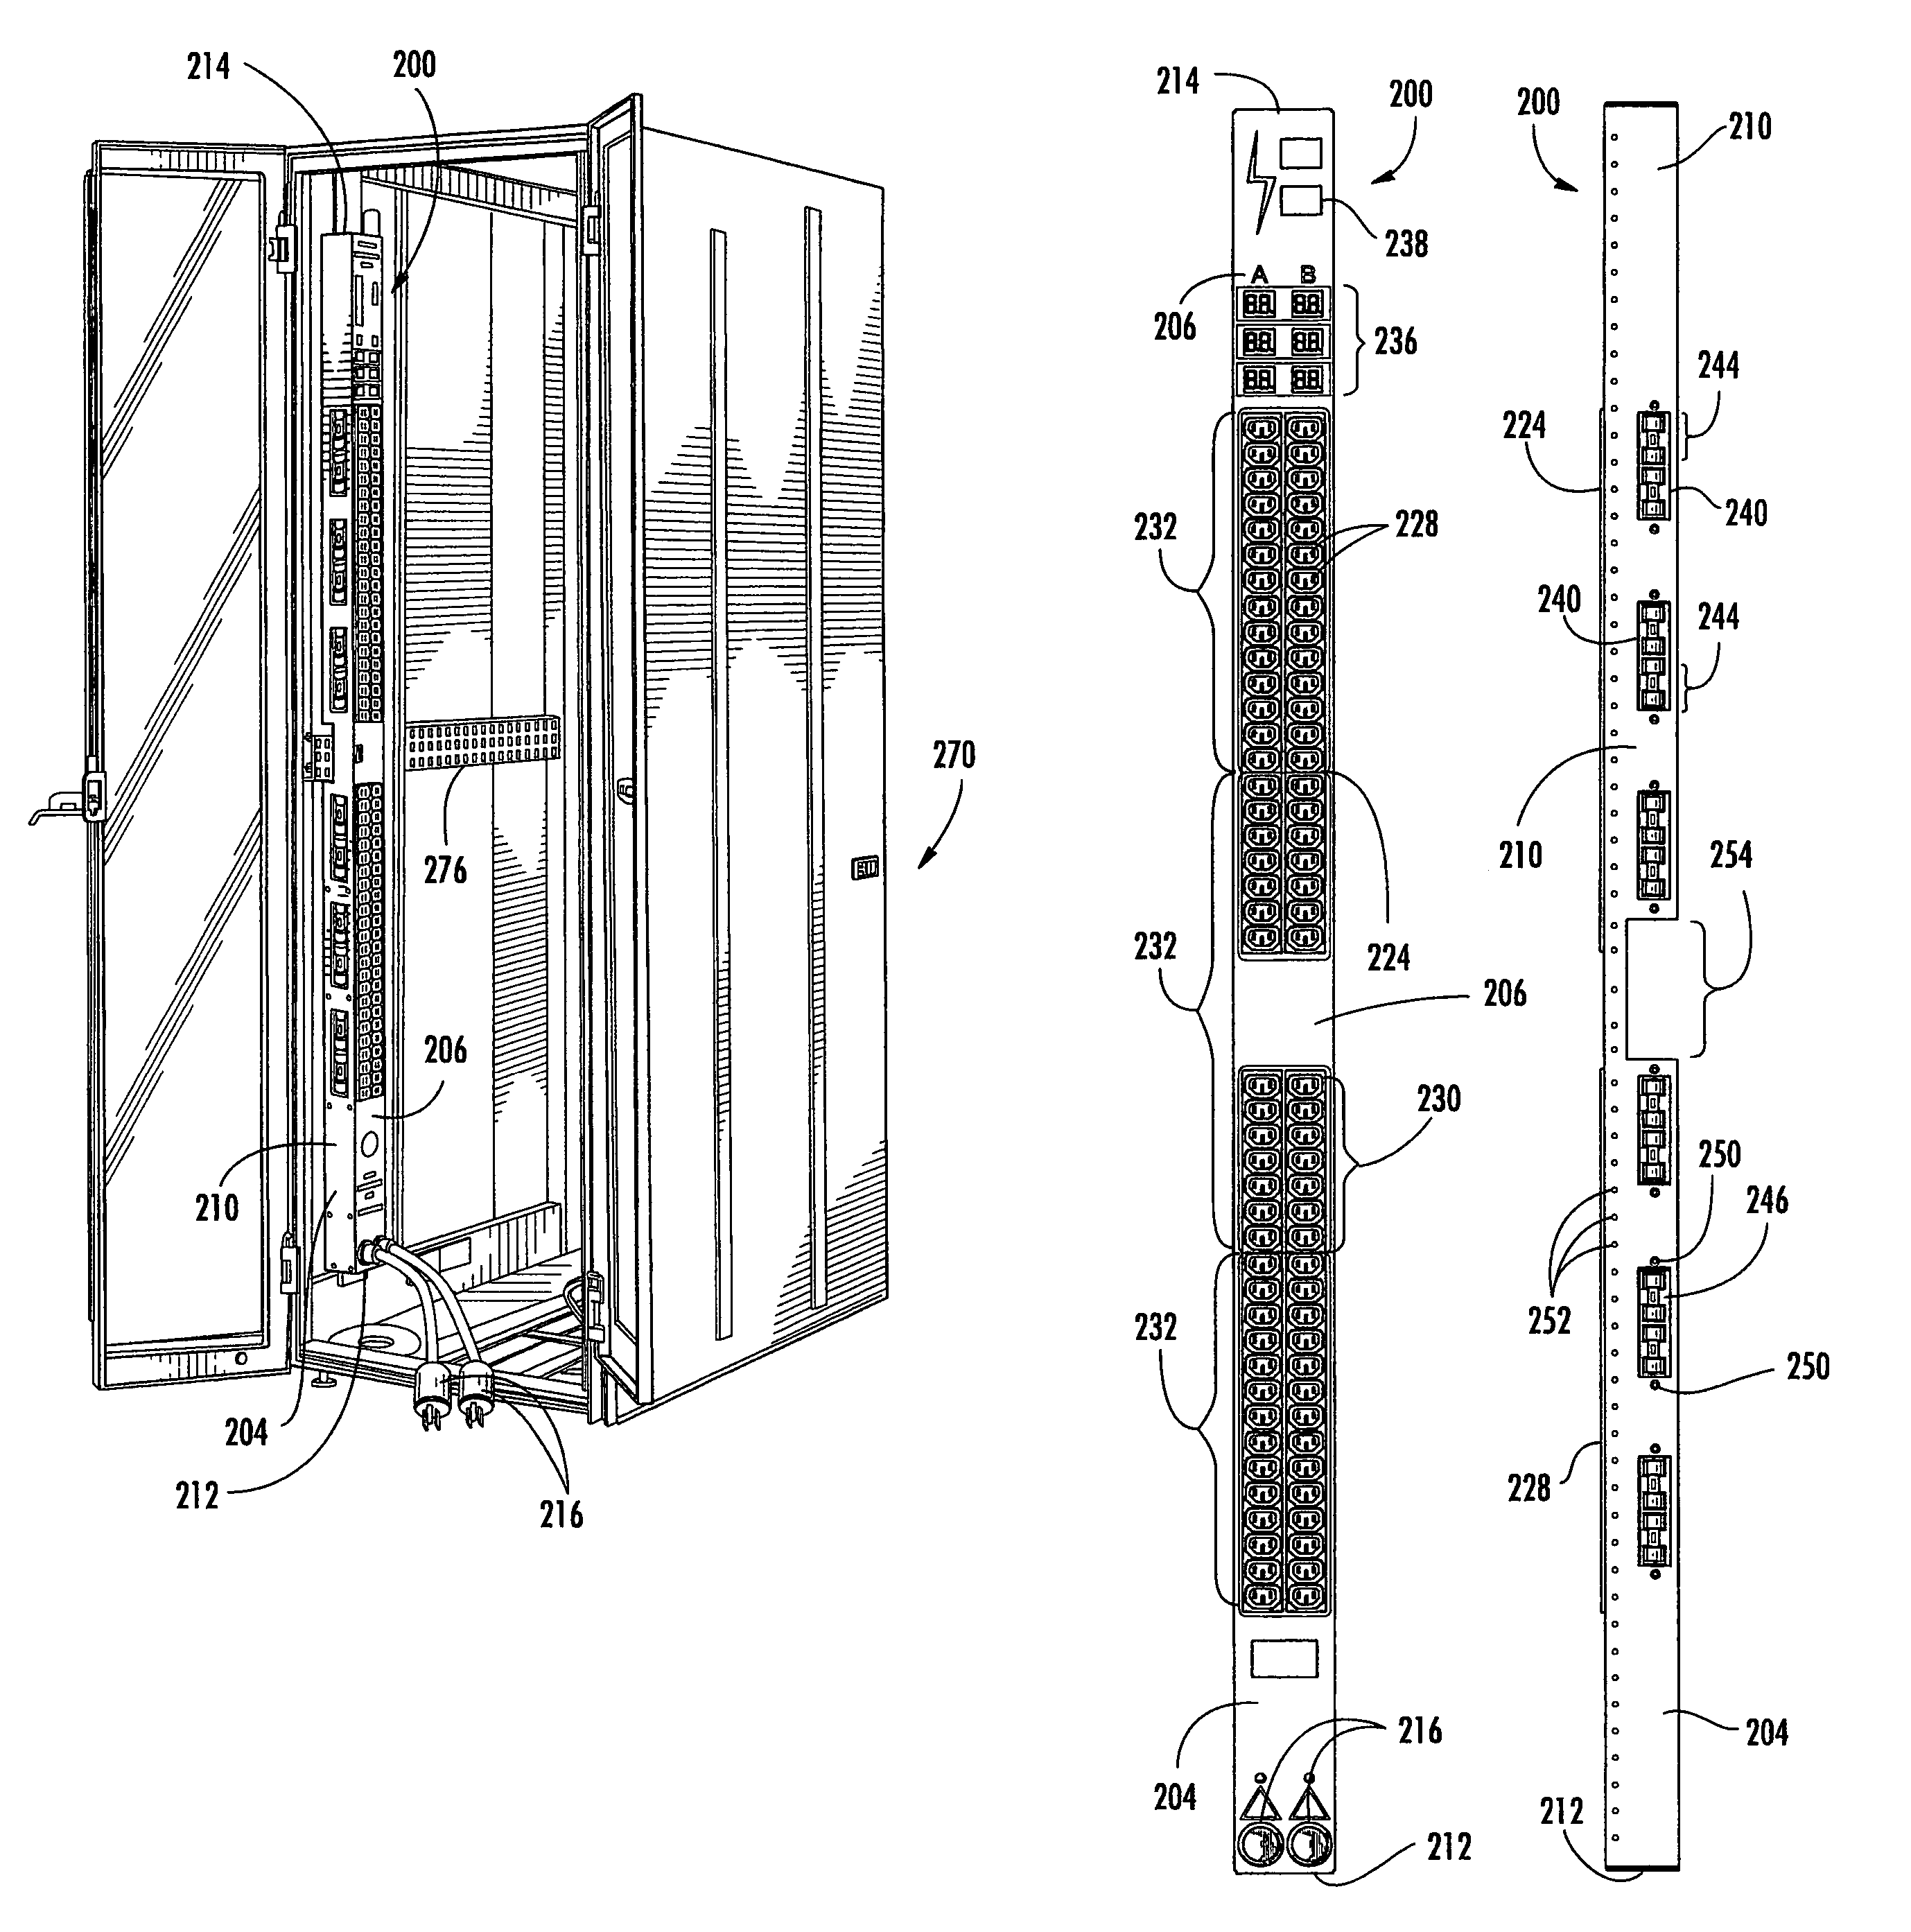 Ganged outlet power distribution apparatus